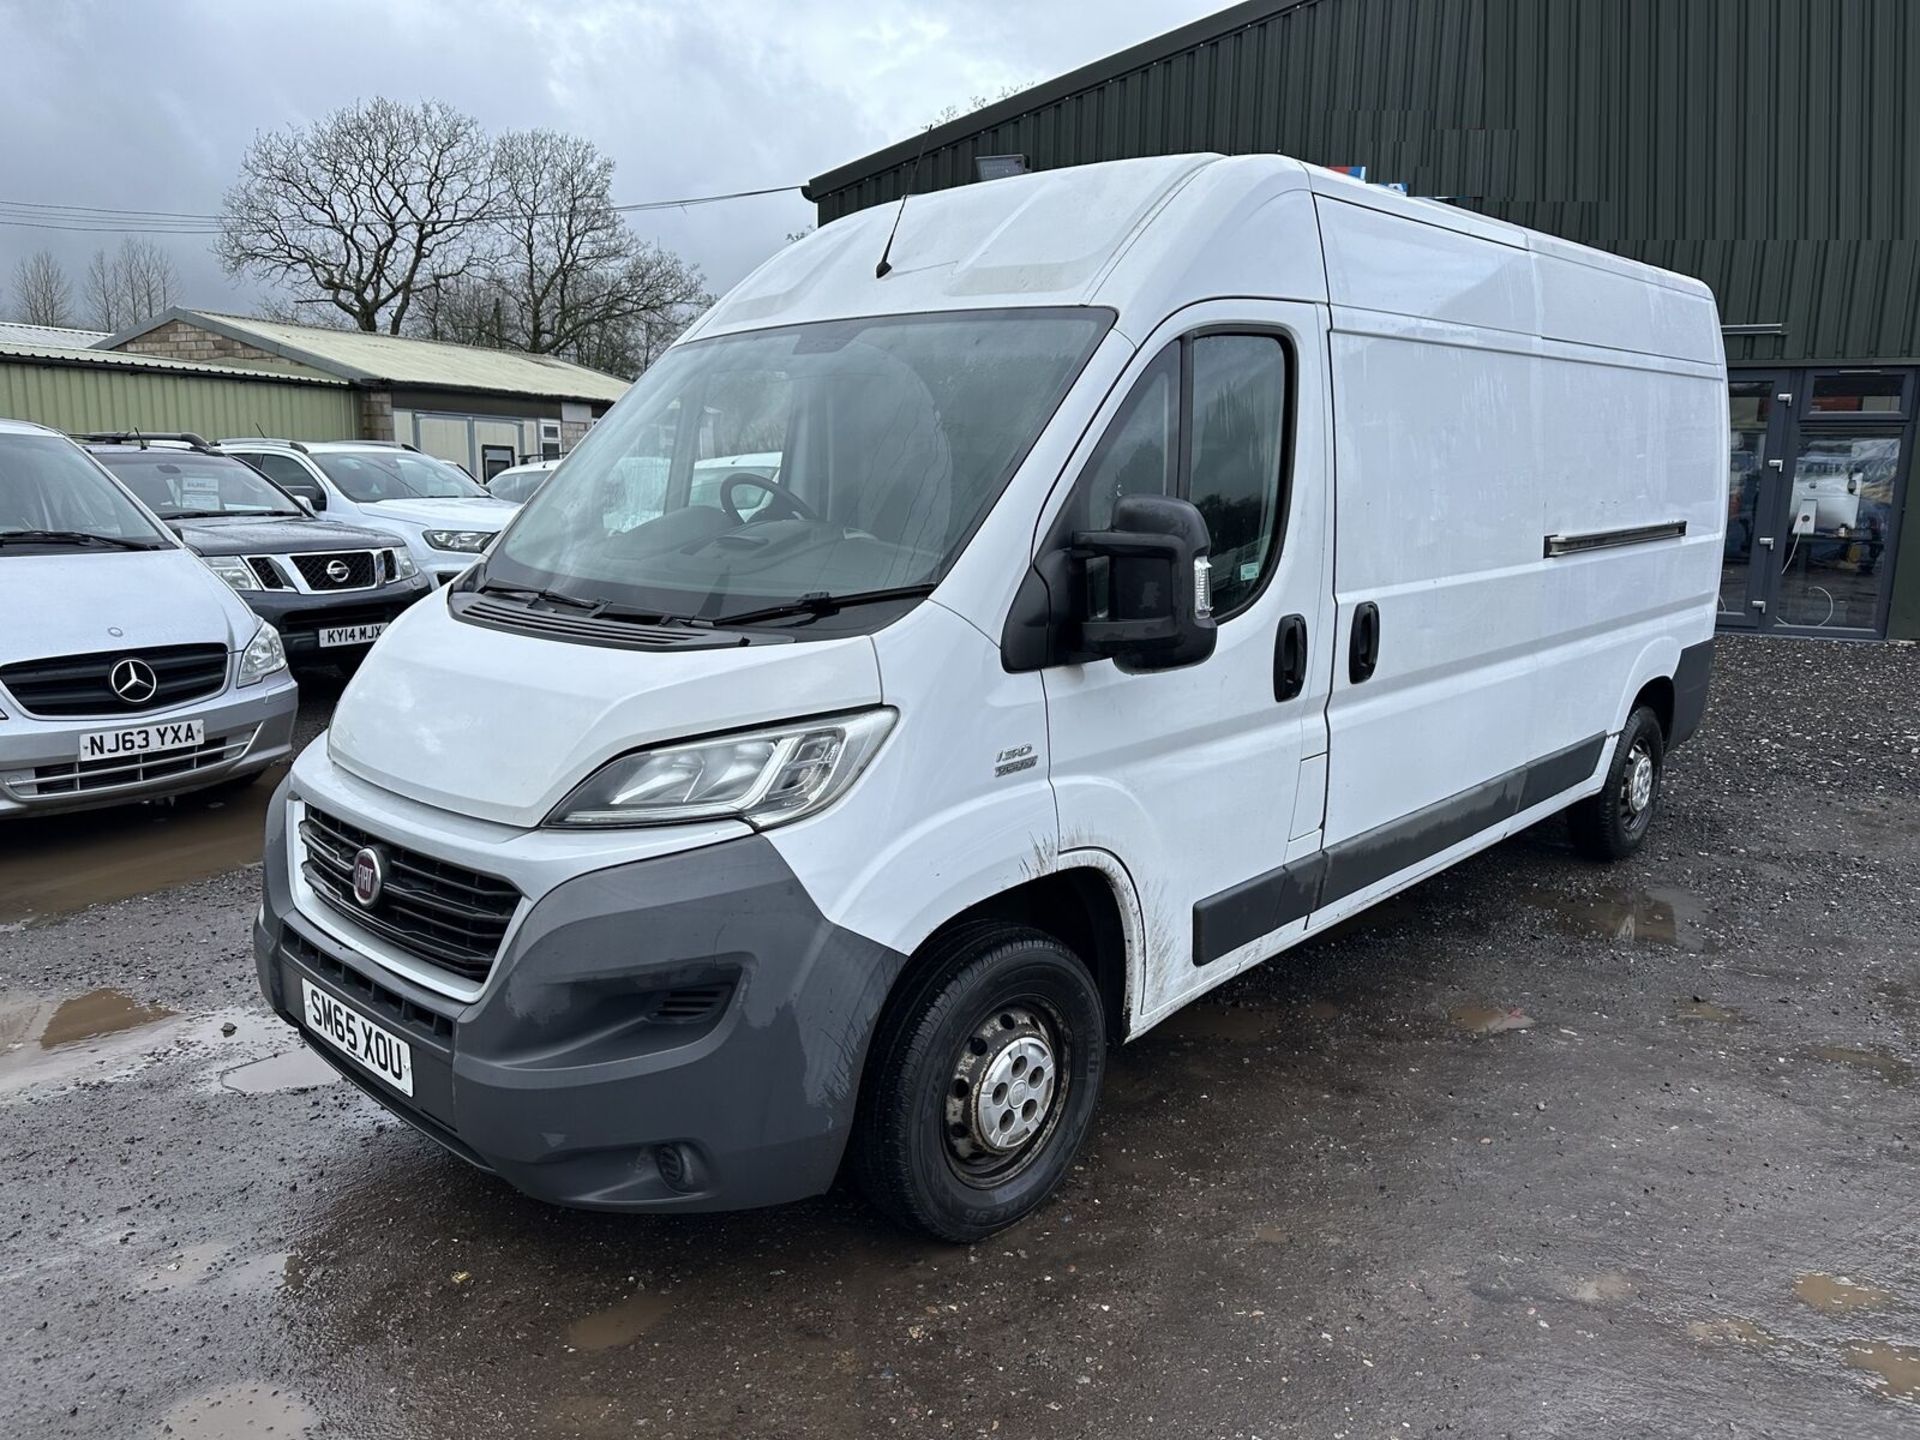 CAMPER'S CHOICE: DUCATO 35 MULTIJET - PERFECT CANVAS FOR EXPLORATION - Image 2 of 20